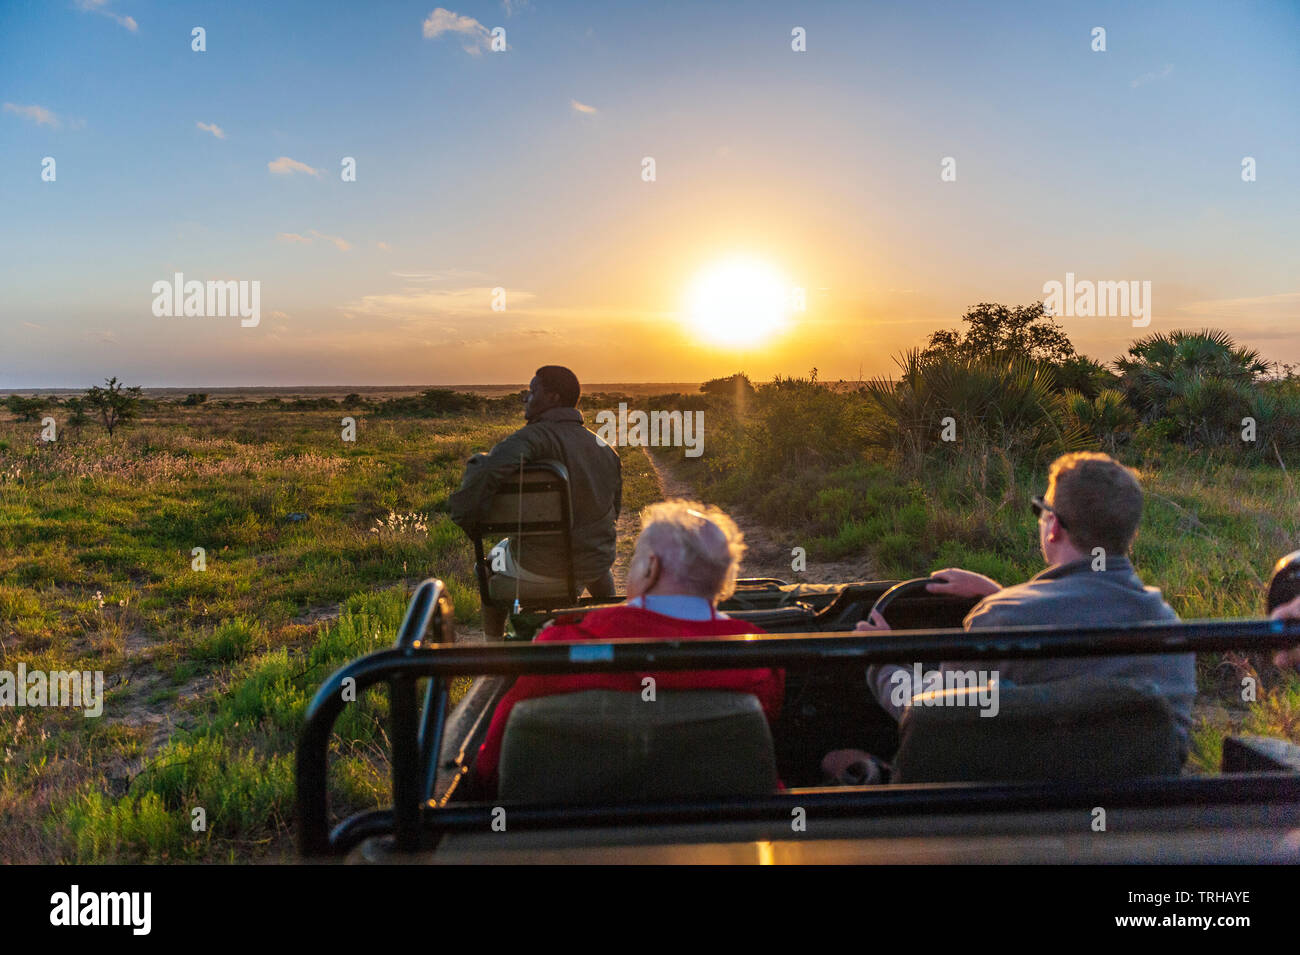 On a sunset game drive at the Phinda Private Game Reserve, an andBeyond owned nature reserve in eastern South Africa. Stock Photo